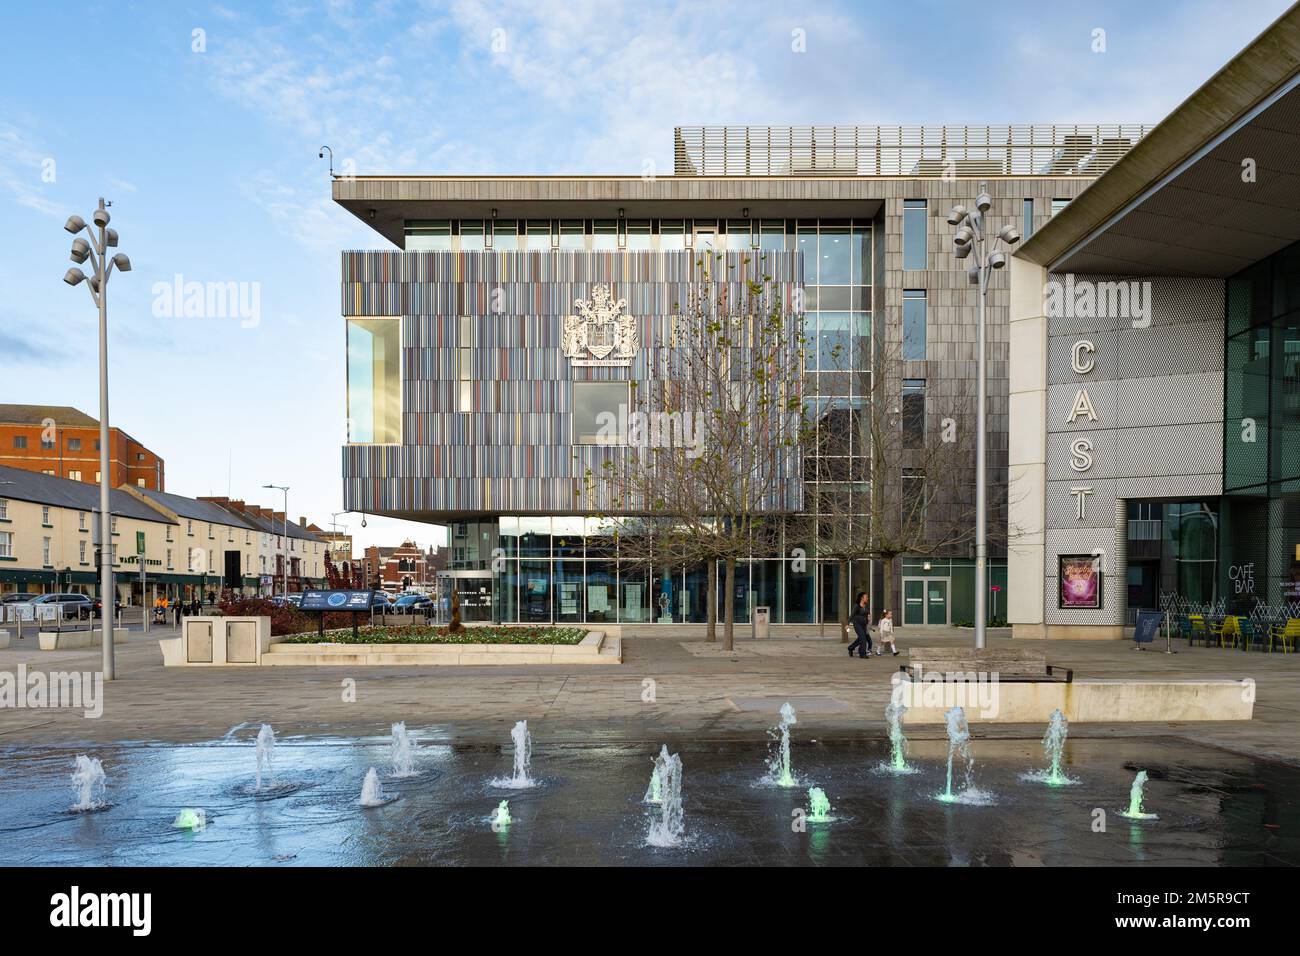 Doncaster Civic and Cultural Quarter - Doncaster Council Offices and Cast Theatre - Sir Nigel Gresley Square, Doncaster, South Yorkshire, England, Großbritannien Stockfoto